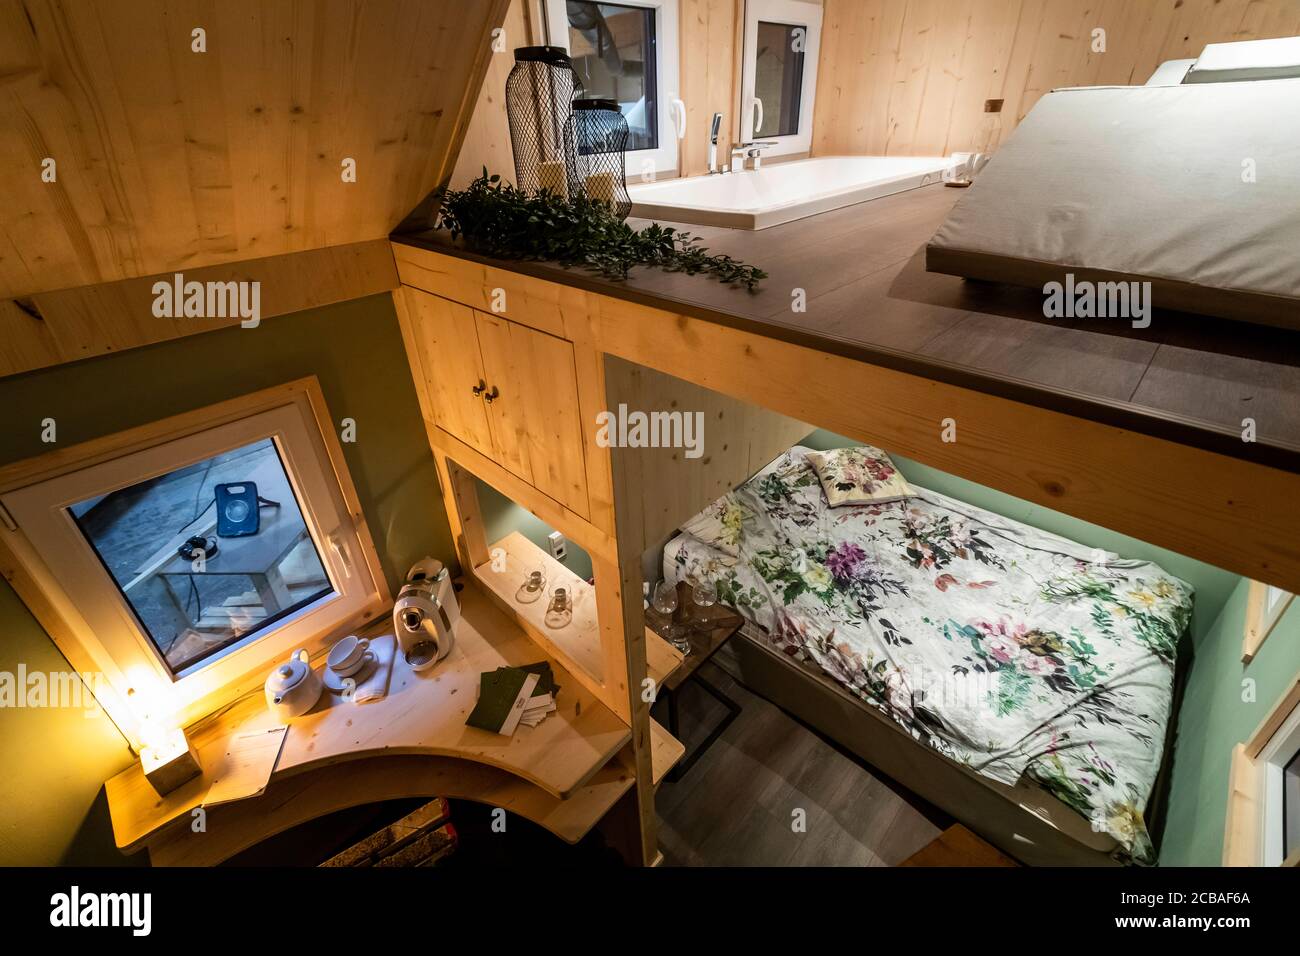 Tiny House Interior High Resolution Stock Photography and Images - Alamy